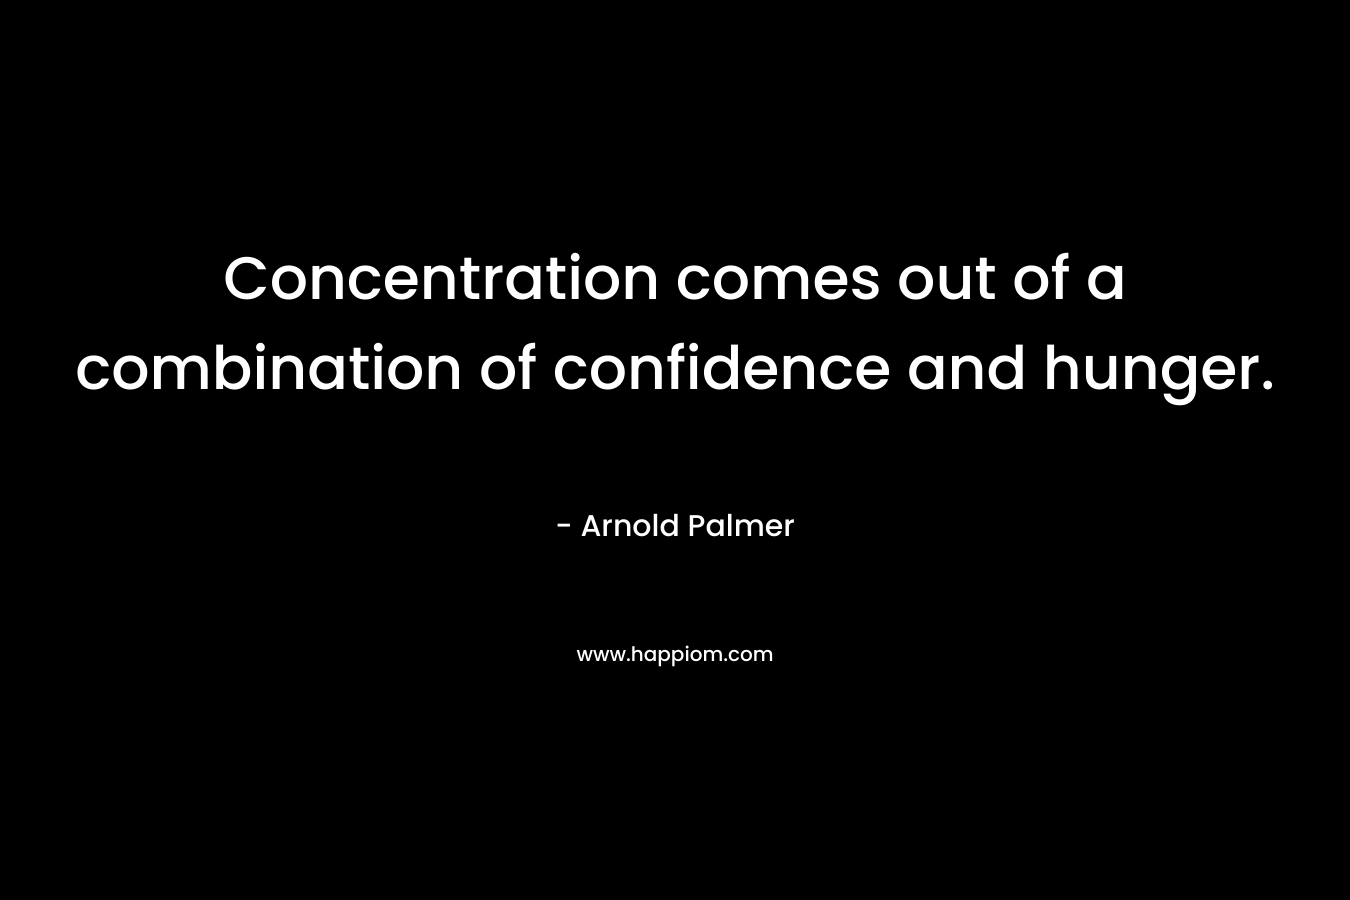 Concentration comes out of a combination of confidence and hunger.